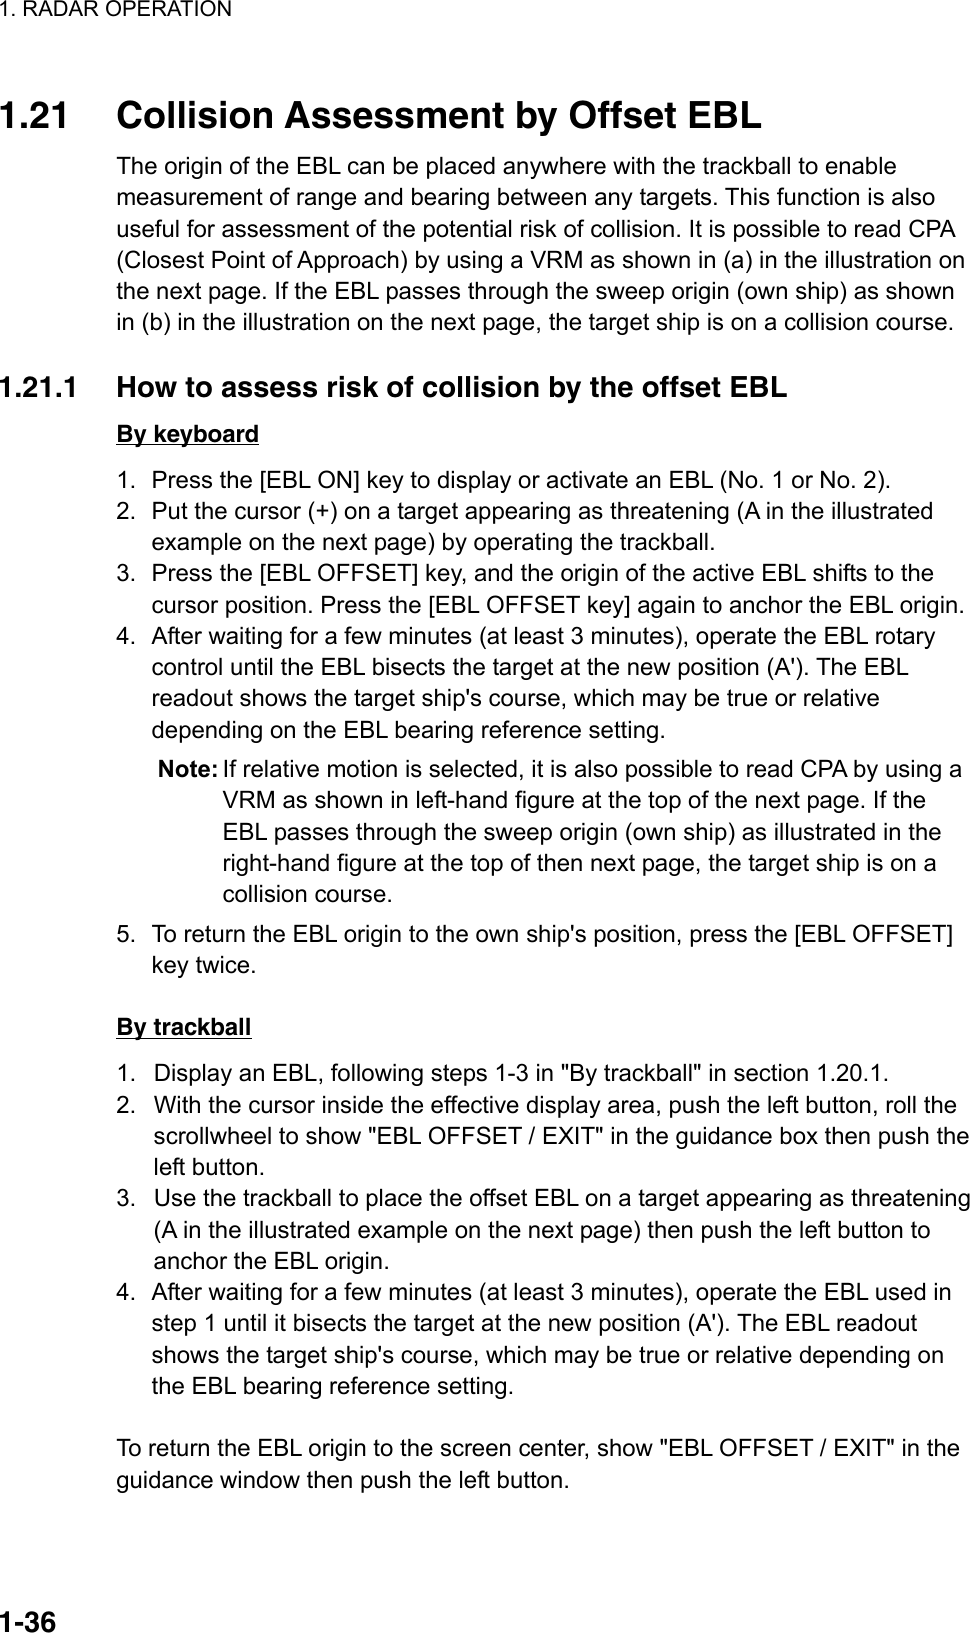 1. RADAR OPERATION  1-36 1.21  Collision Assessment by Offset EBL The origin of the EBL can be placed anywhere with the trackball to enable measurement of range and bearing between any targets. This function is also useful for assessment of the potential risk of collision. It is possible to read CPA (Closest Point of Approach) by using a VRM as shown in (a) in the illustration on the next page. If the EBL passes through the sweep origin (own ship) as shown in (b) in the illustration on the next page, the target ship is on a collision course.  1.21.1  How to assess risk of collision by the offset EBL By keyboard 1.  Press the [EBL ON] key to display or activate an EBL (No. 1 or No. 2). 2.  Put the cursor (+) on a target appearing as threatening (A in the illustrated example on the next page) by operating the trackball. 3.  Press the [EBL OFFSET] key, and the origin of the active EBL shifts to the cursor position. Press the [EBL OFFSET key] again to anchor the EBL origin. 4.  After waiting for a few minutes (at least 3 minutes), operate the EBL rotary control until the EBL bisects the target at the new position (A&apos;). The EBL readout shows the target ship&apos;s course, which may be true or relative depending on the EBL bearing reference setting. Note: If relative motion is selected, it is also possible to read CPA by using a VRM as shown in left-hand figure at the top of the next page. If the EBL passes through the sweep origin (own ship) as illustrated in the right-hand figure at the top of then next page, the target ship is on a collision course. 5.  To return the EBL origin to the own ship&apos;s position, press the [EBL OFFSET] key twice.  By trackball 1.  Display an EBL, following steps 1-3 in &quot;By trackball&quot; in section 1.20.1. 2.  With the cursor inside the effective display area, push the left button, roll the scrollwheel to show &quot;EBL OFFSET / EXIT&quot; in the guidance box then push the left button.   3.  Use the trackball to place the offset EBL on a target appearing as threatening (A in the illustrated example on the next page) then push the left button to anchor the EBL origin. 4.  After waiting for a few minutes (at least 3 minutes), operate the EBL used in step 1 until it bisects the target at the new position (A&apos;). The EBL readout shows the target ship&apos;s course, which may be true or relative depending on the EBL bearing reference setting.  To return the EBL origin to the screen center, show &quot;EBL OFFSET / EXIT&quot; in the guidance window then push the left button. 